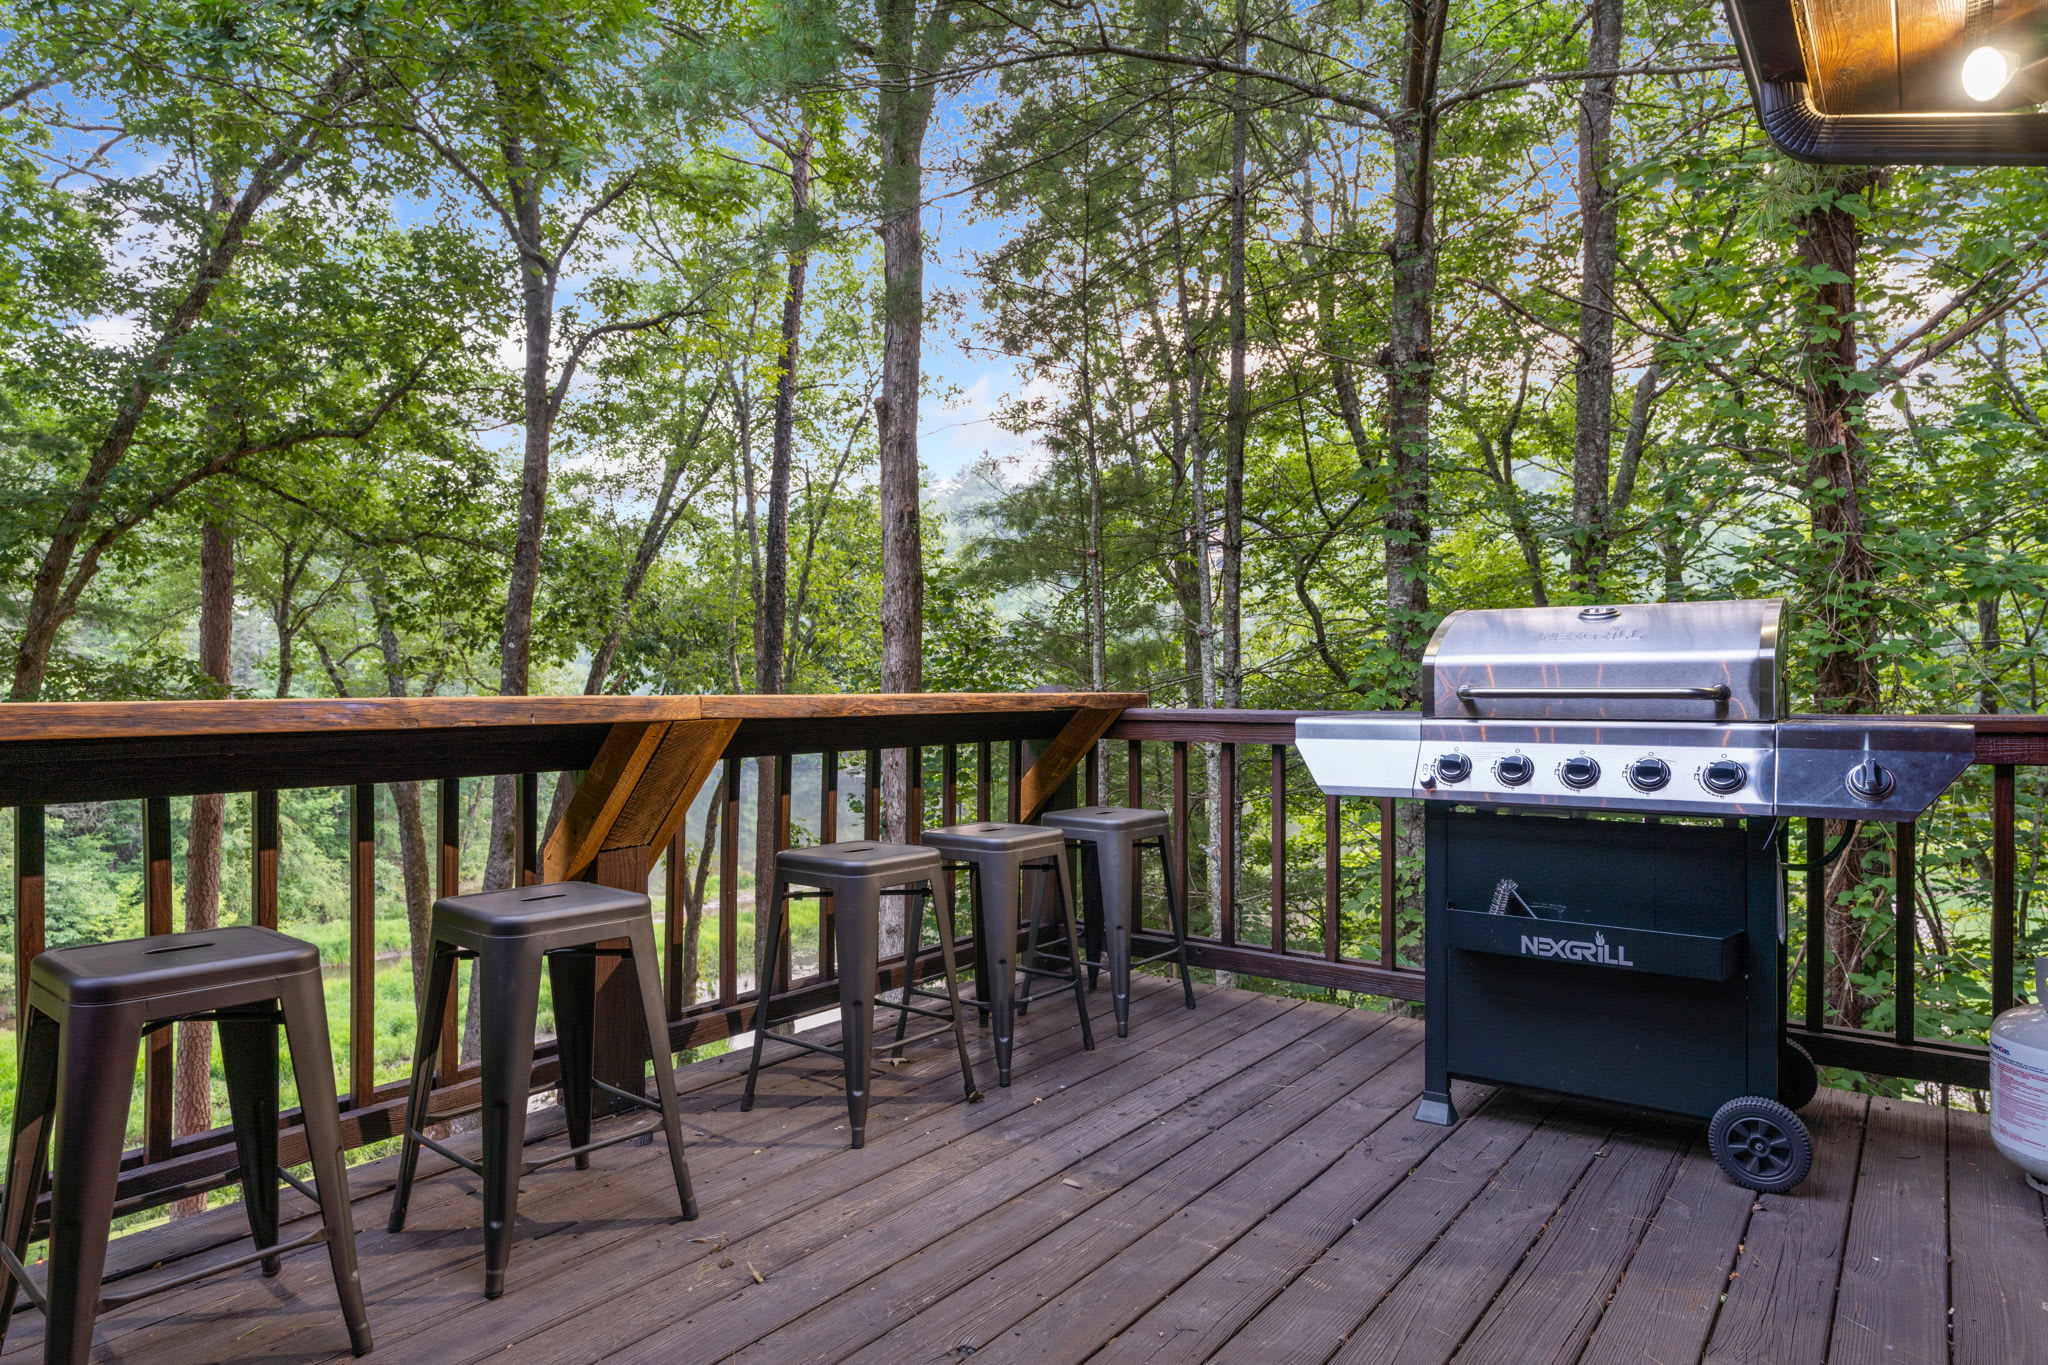 This is just the corner of one of our very large back decks. Lots of bar top seating overlooking the wooded backyard and Allen Lake. Fire up the new Nexgrill- always loaded with propane, ready to go for the grill master to entertain.